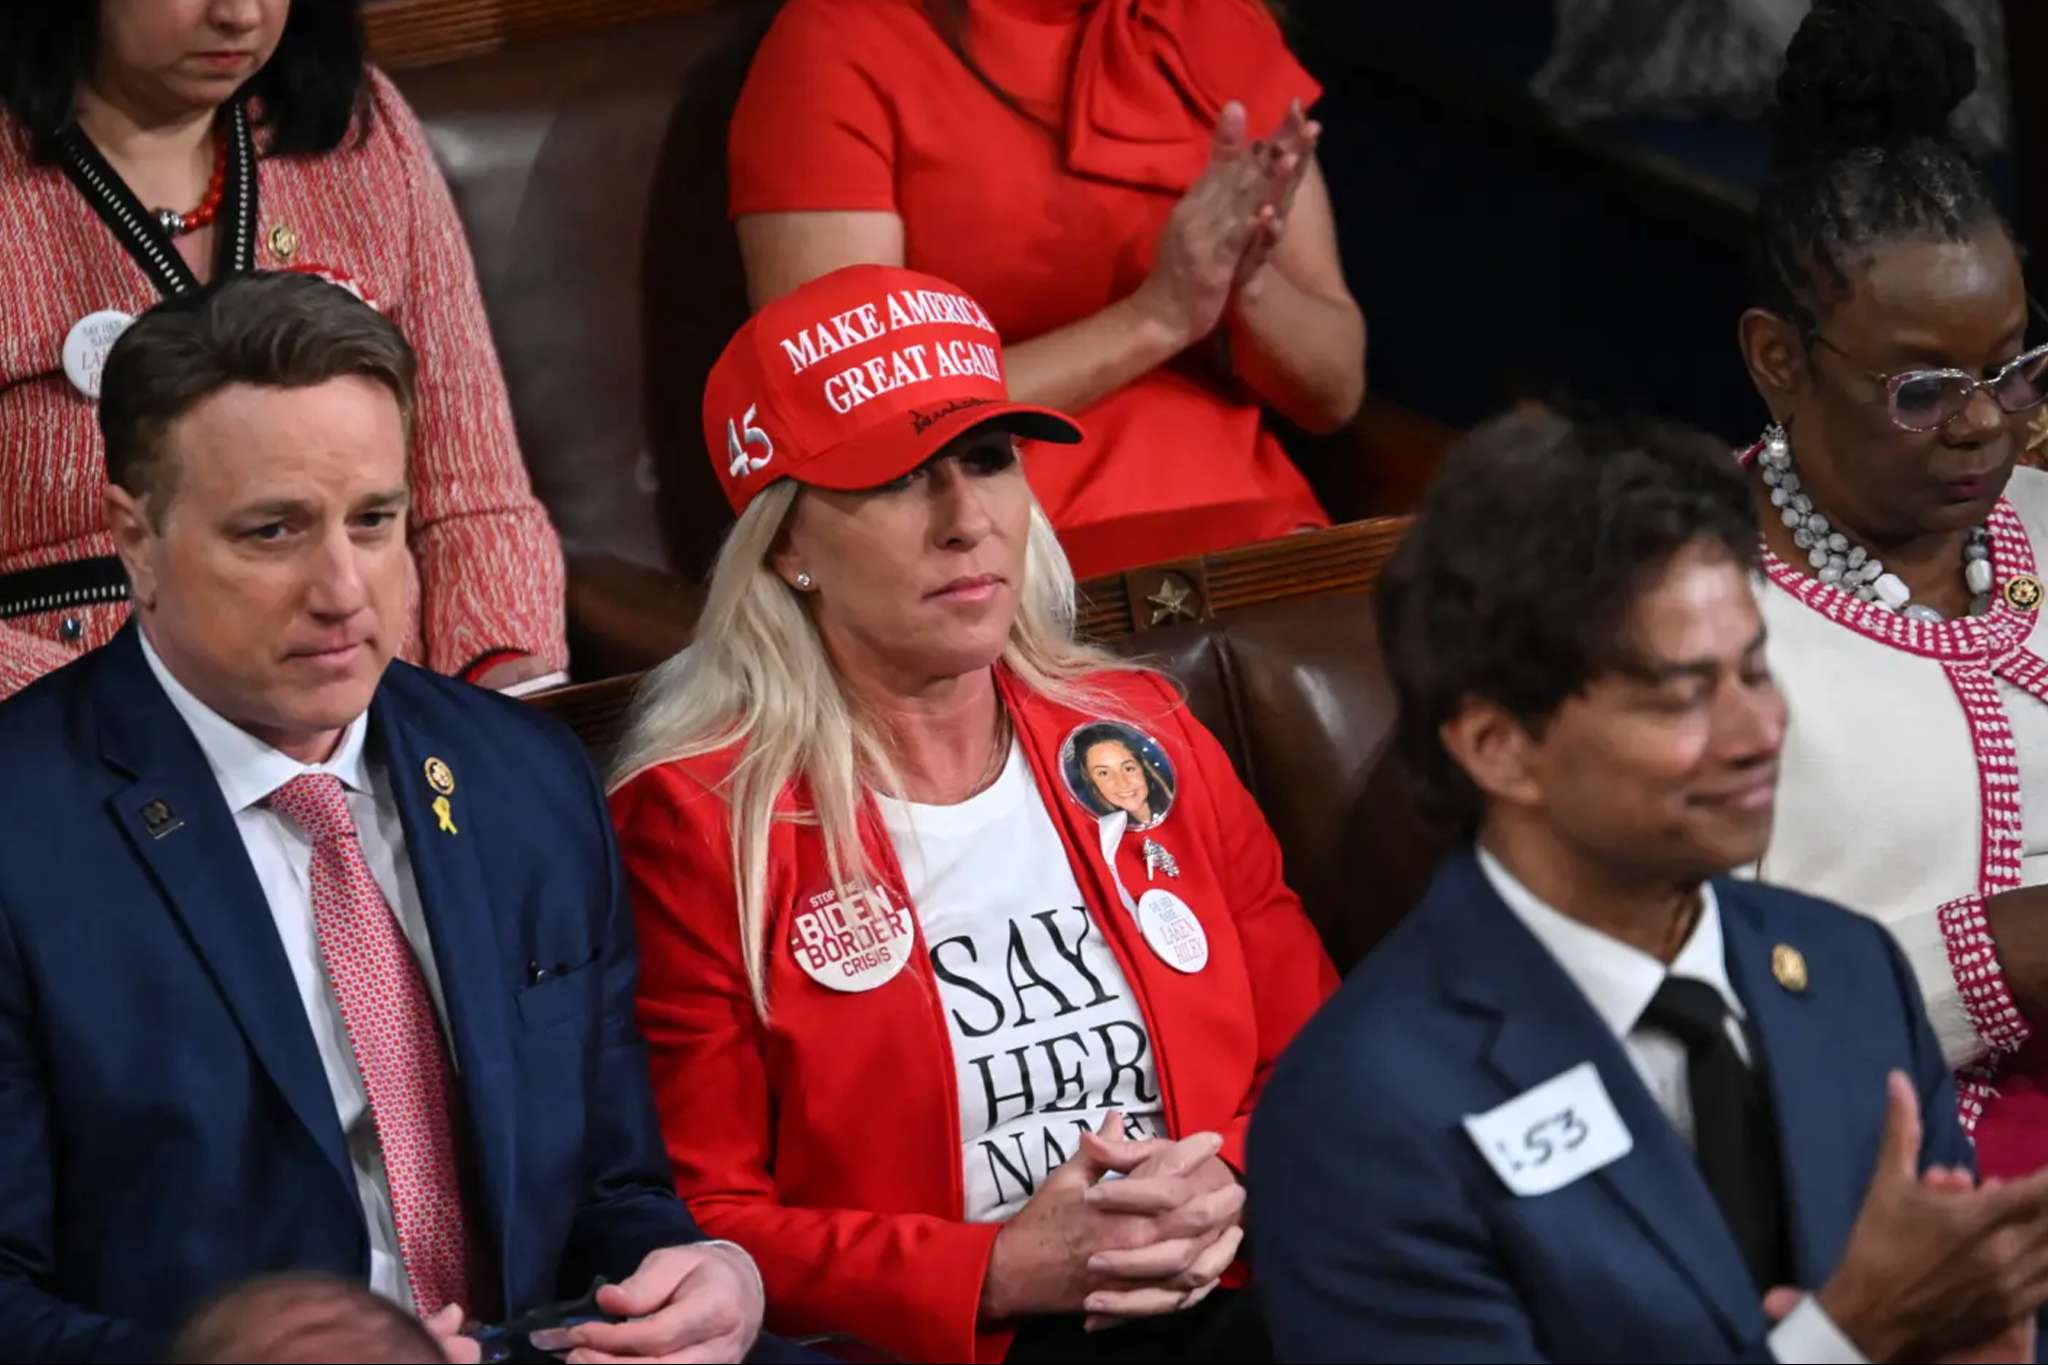 Marjorie Taylor Greene was recently observed donning a MAGA hat